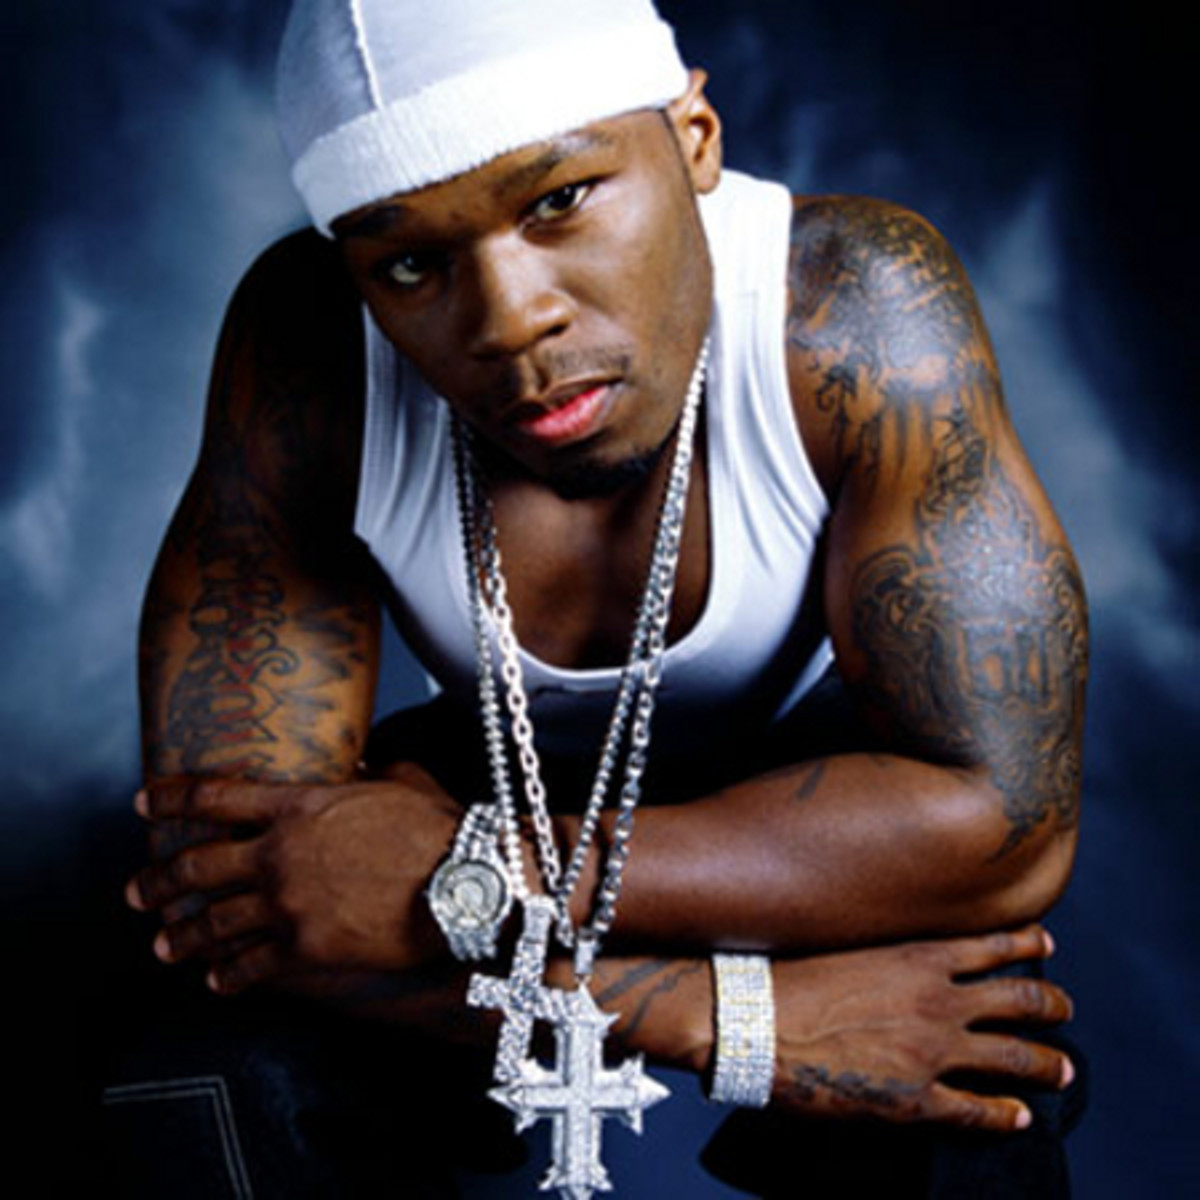 #Thewrapupmagazine: Name Your Most Favorite 50 Cent Track